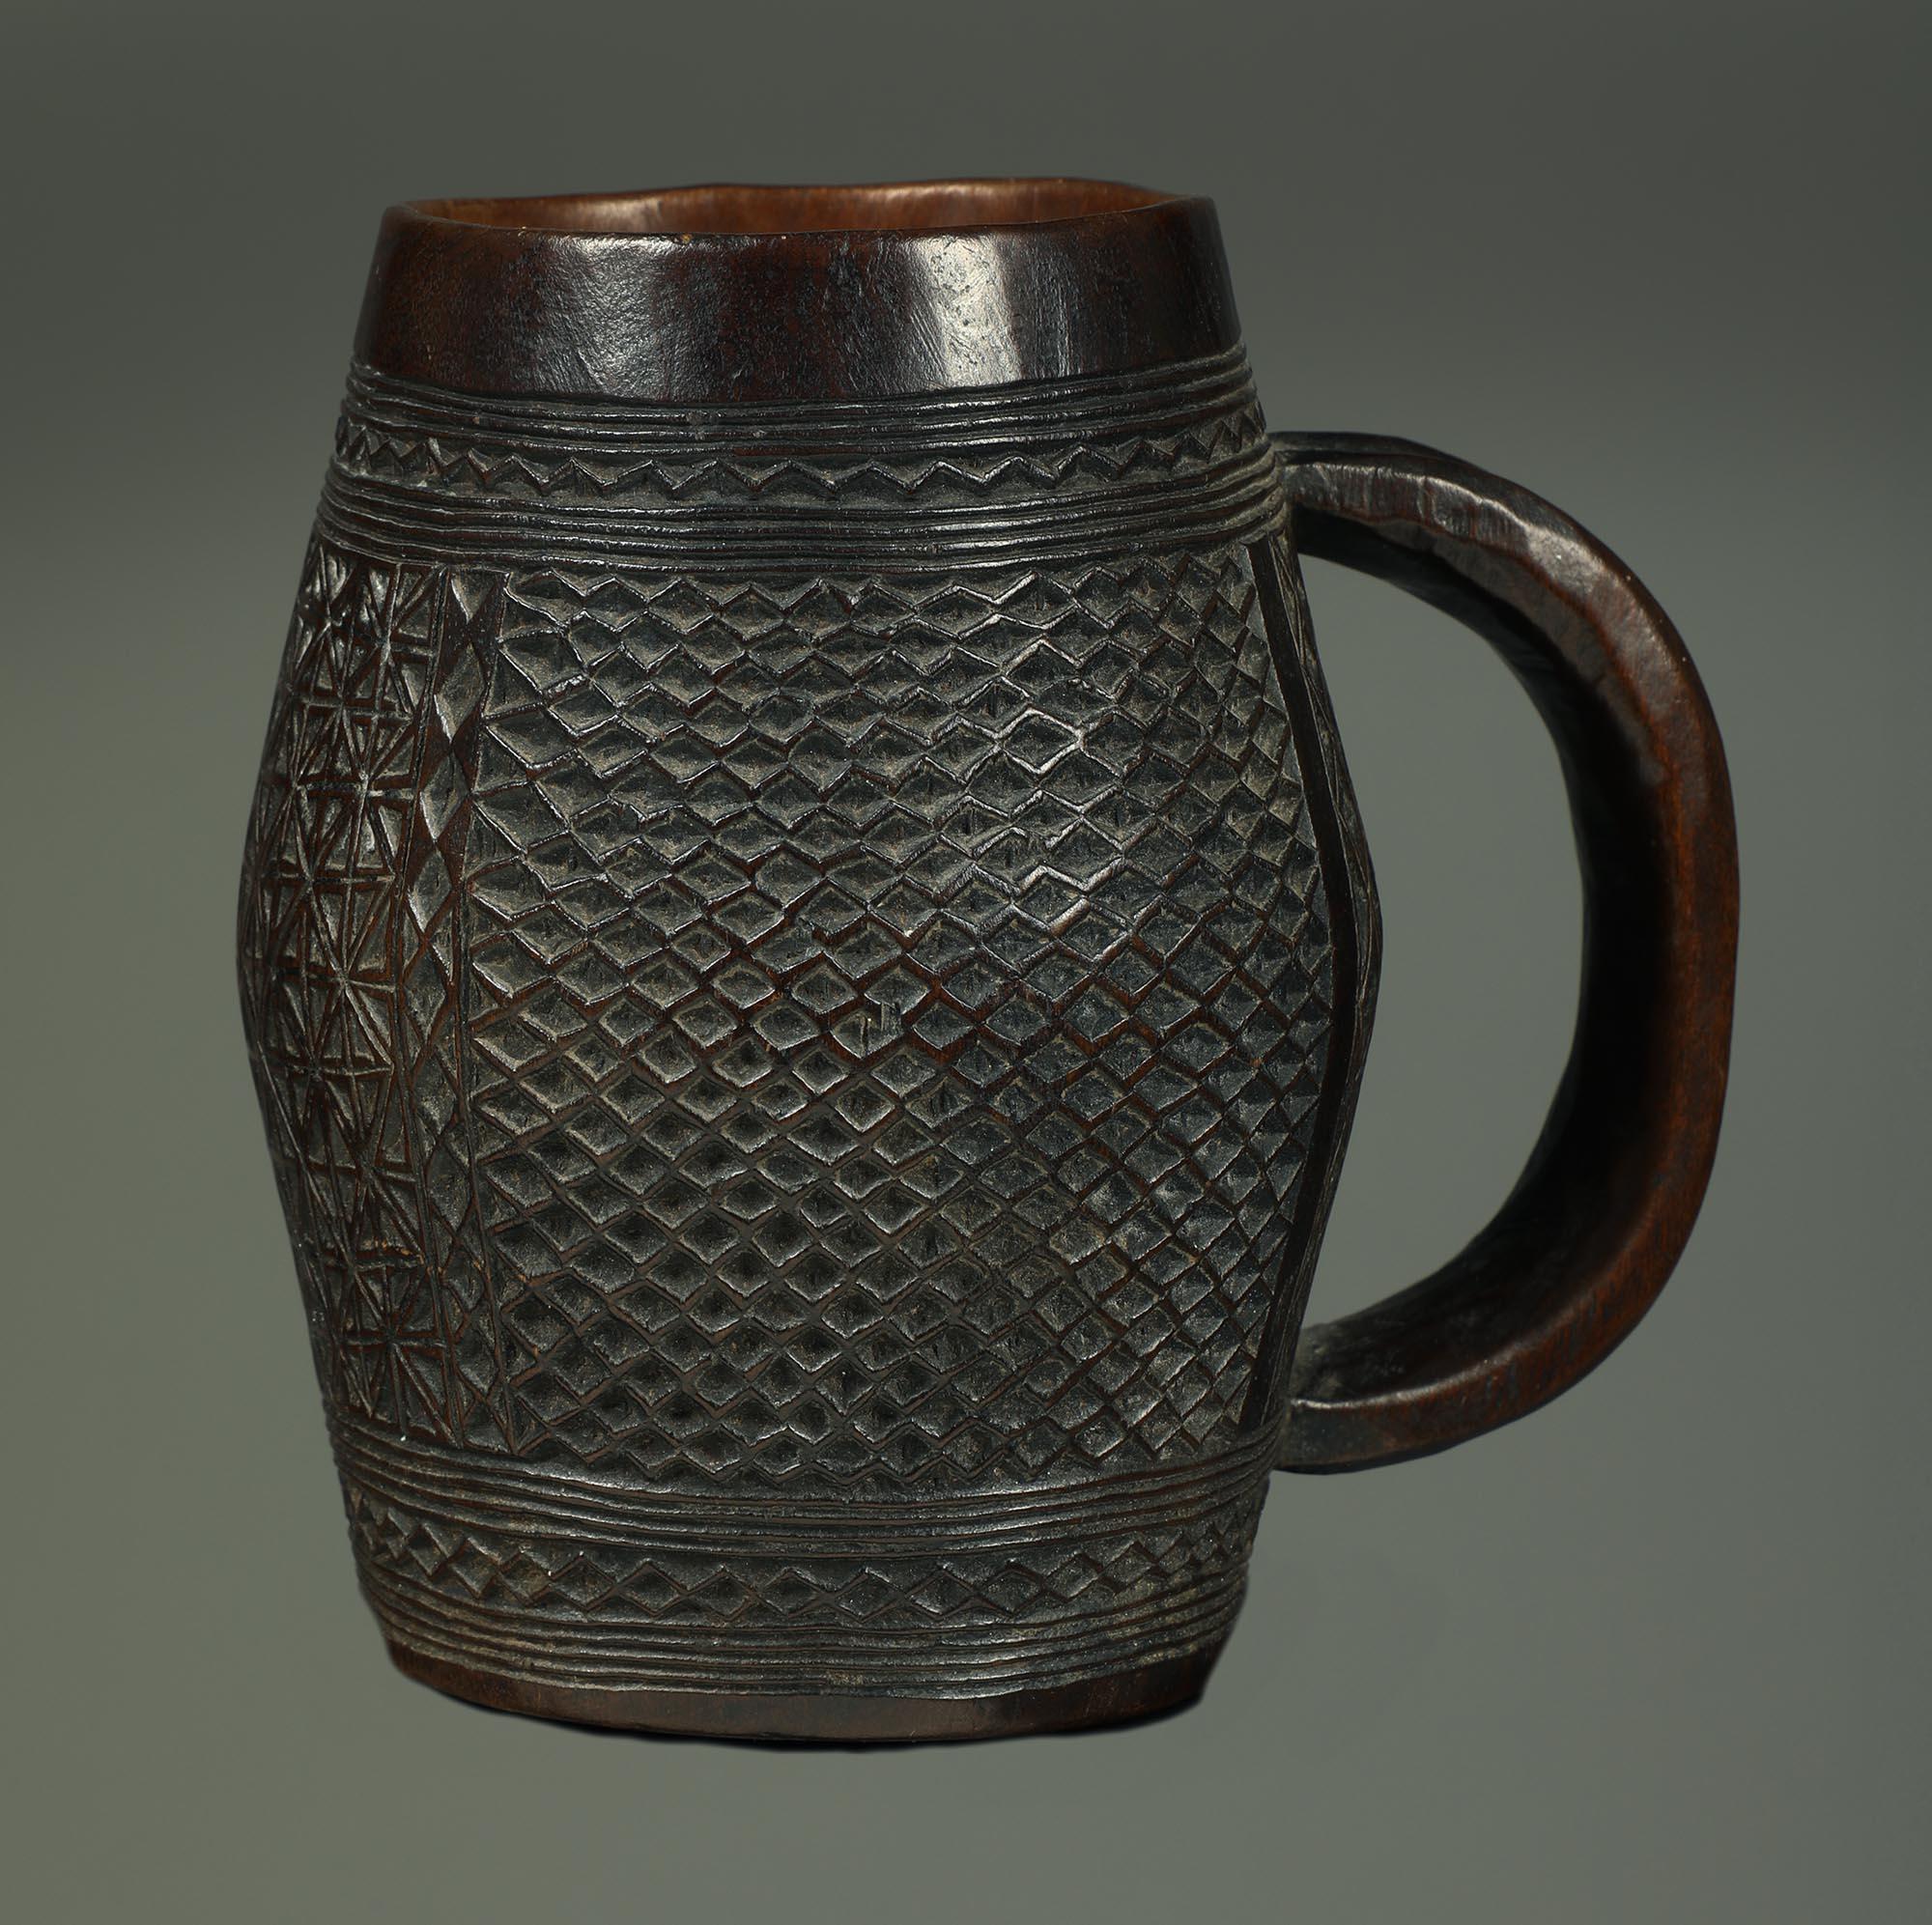 Fine Kuba Cup with Incised Textile Designs, early 20th century Central Africa  In Fair Condition For Sale In Point Richmond, CA